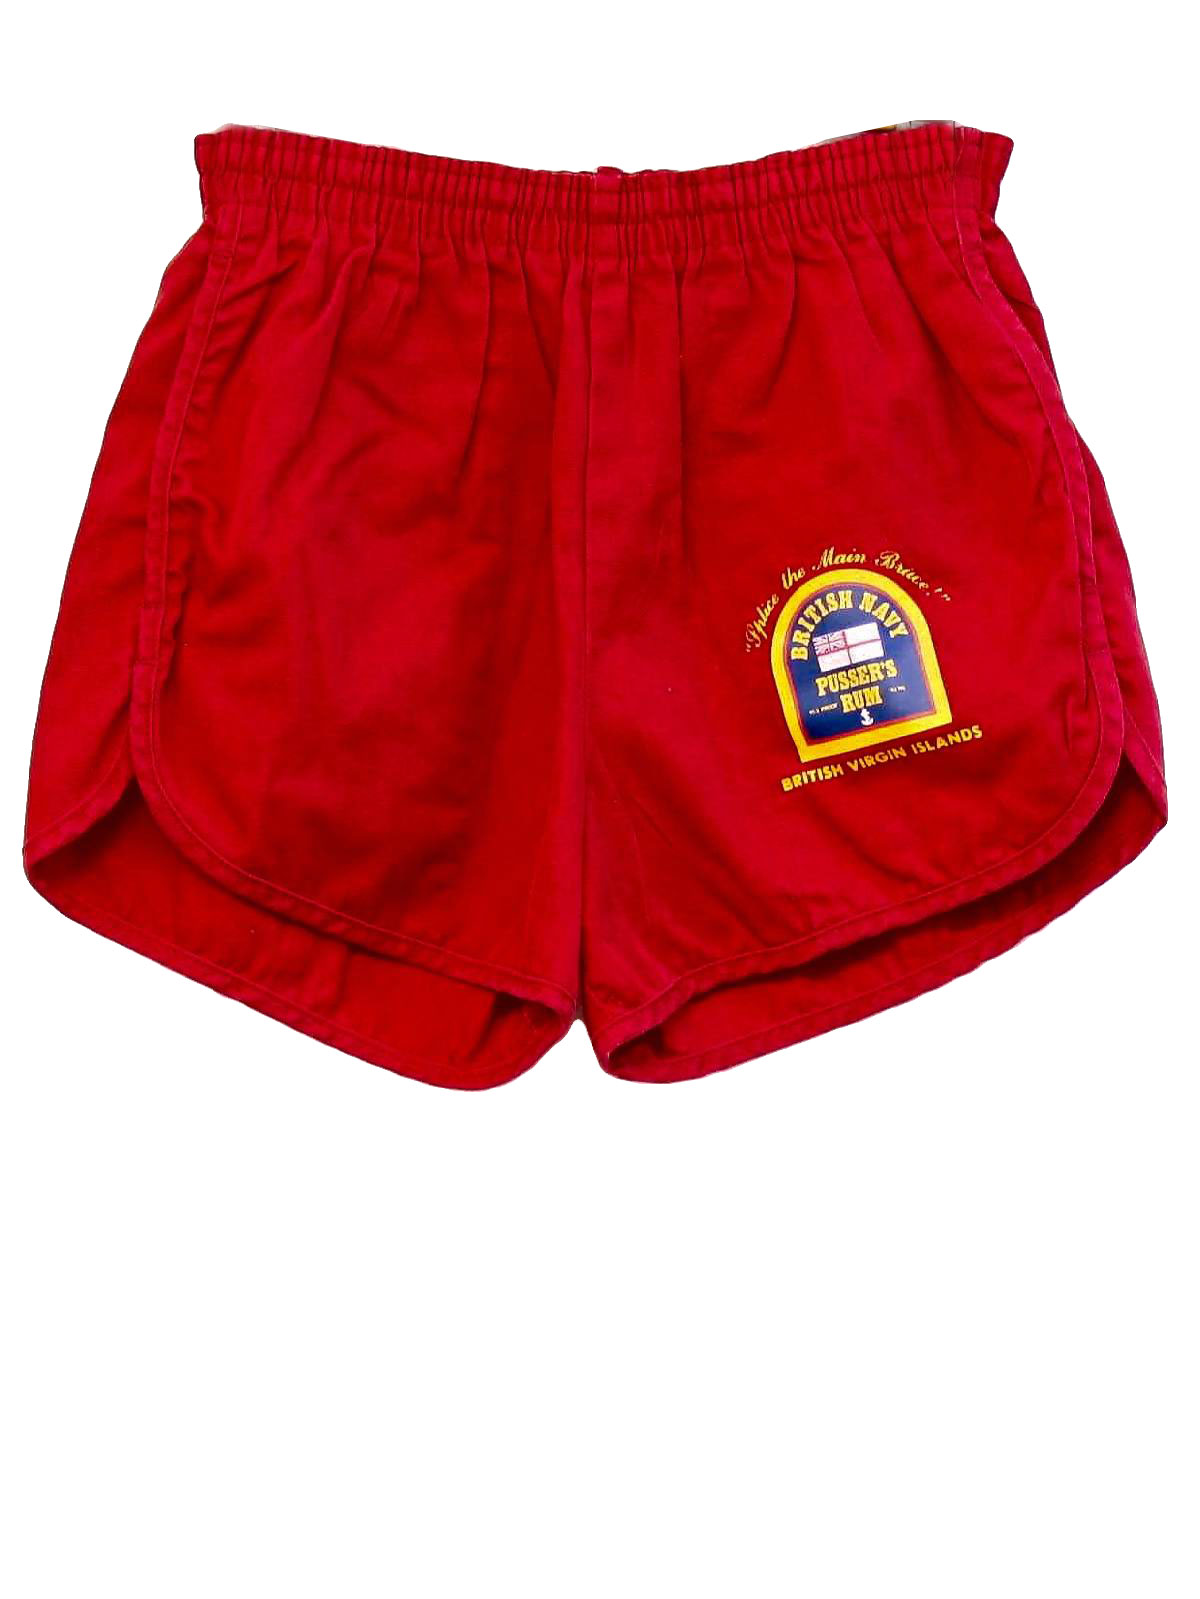 1980's Shorts (Athletic Shorts) 80s Athletic Shorts Mens red